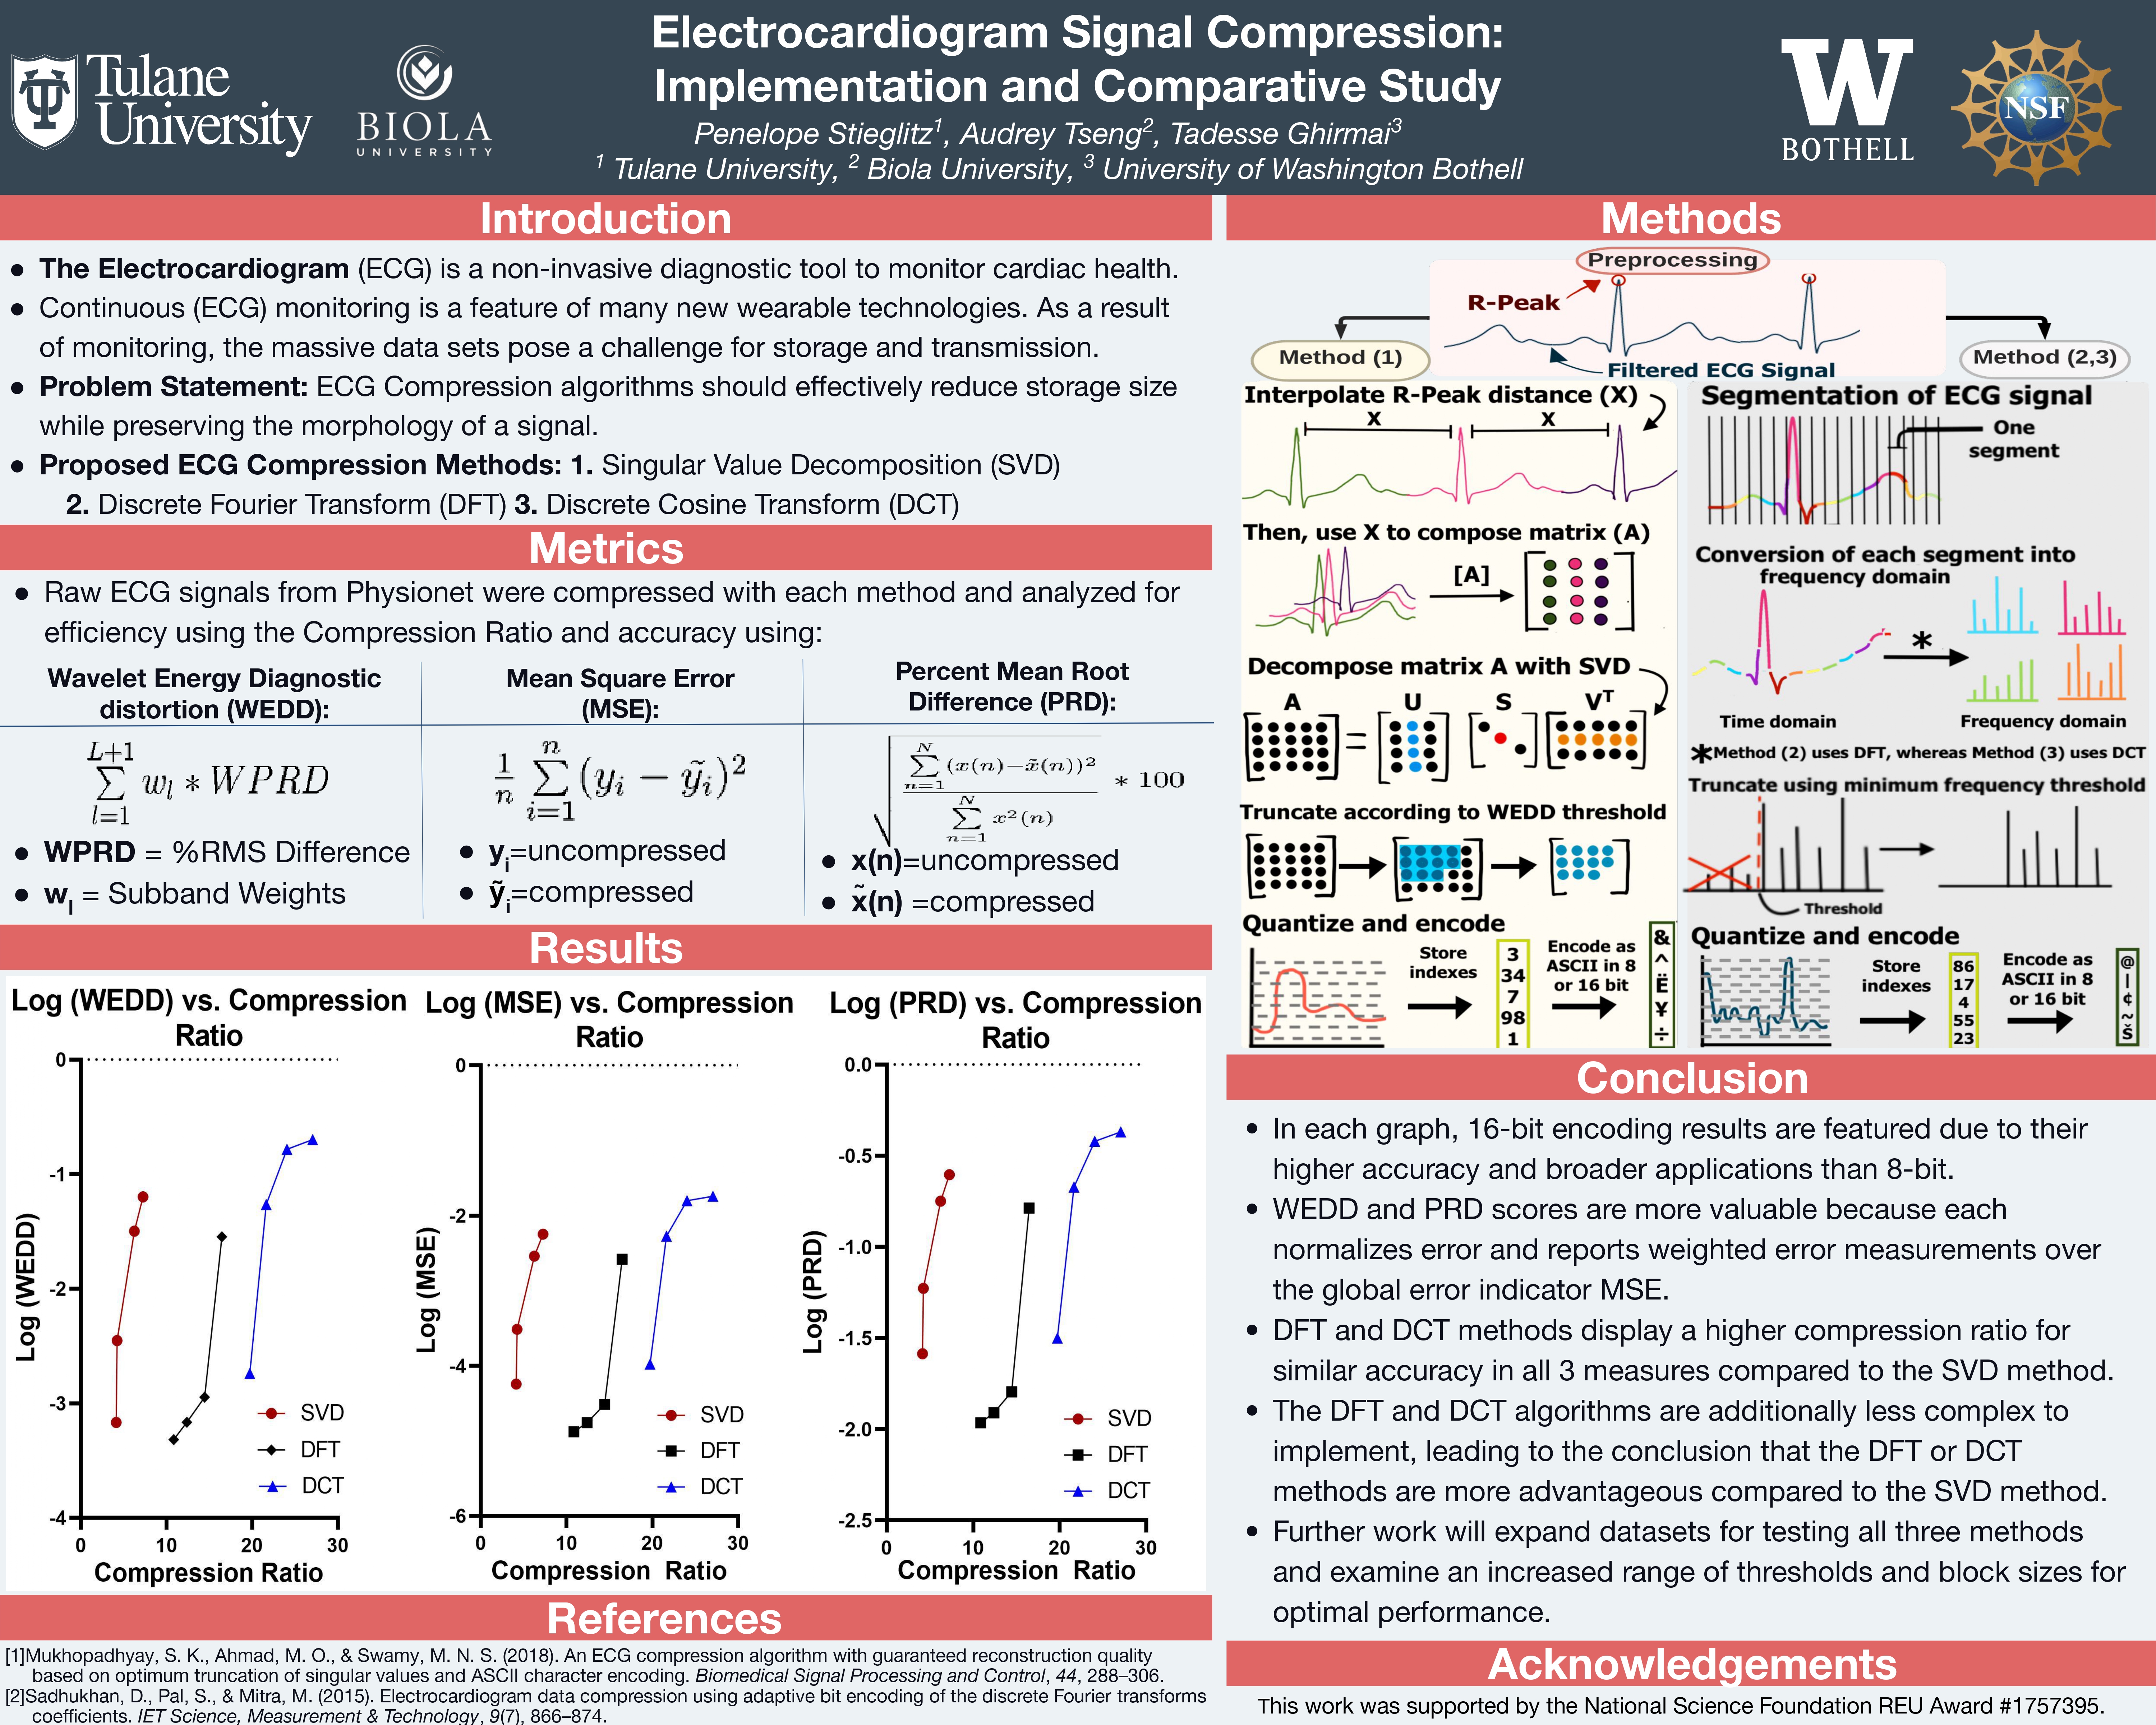 Electrocardiogram Signal Compression and Encoding: Implementation and Comparative Study Poster